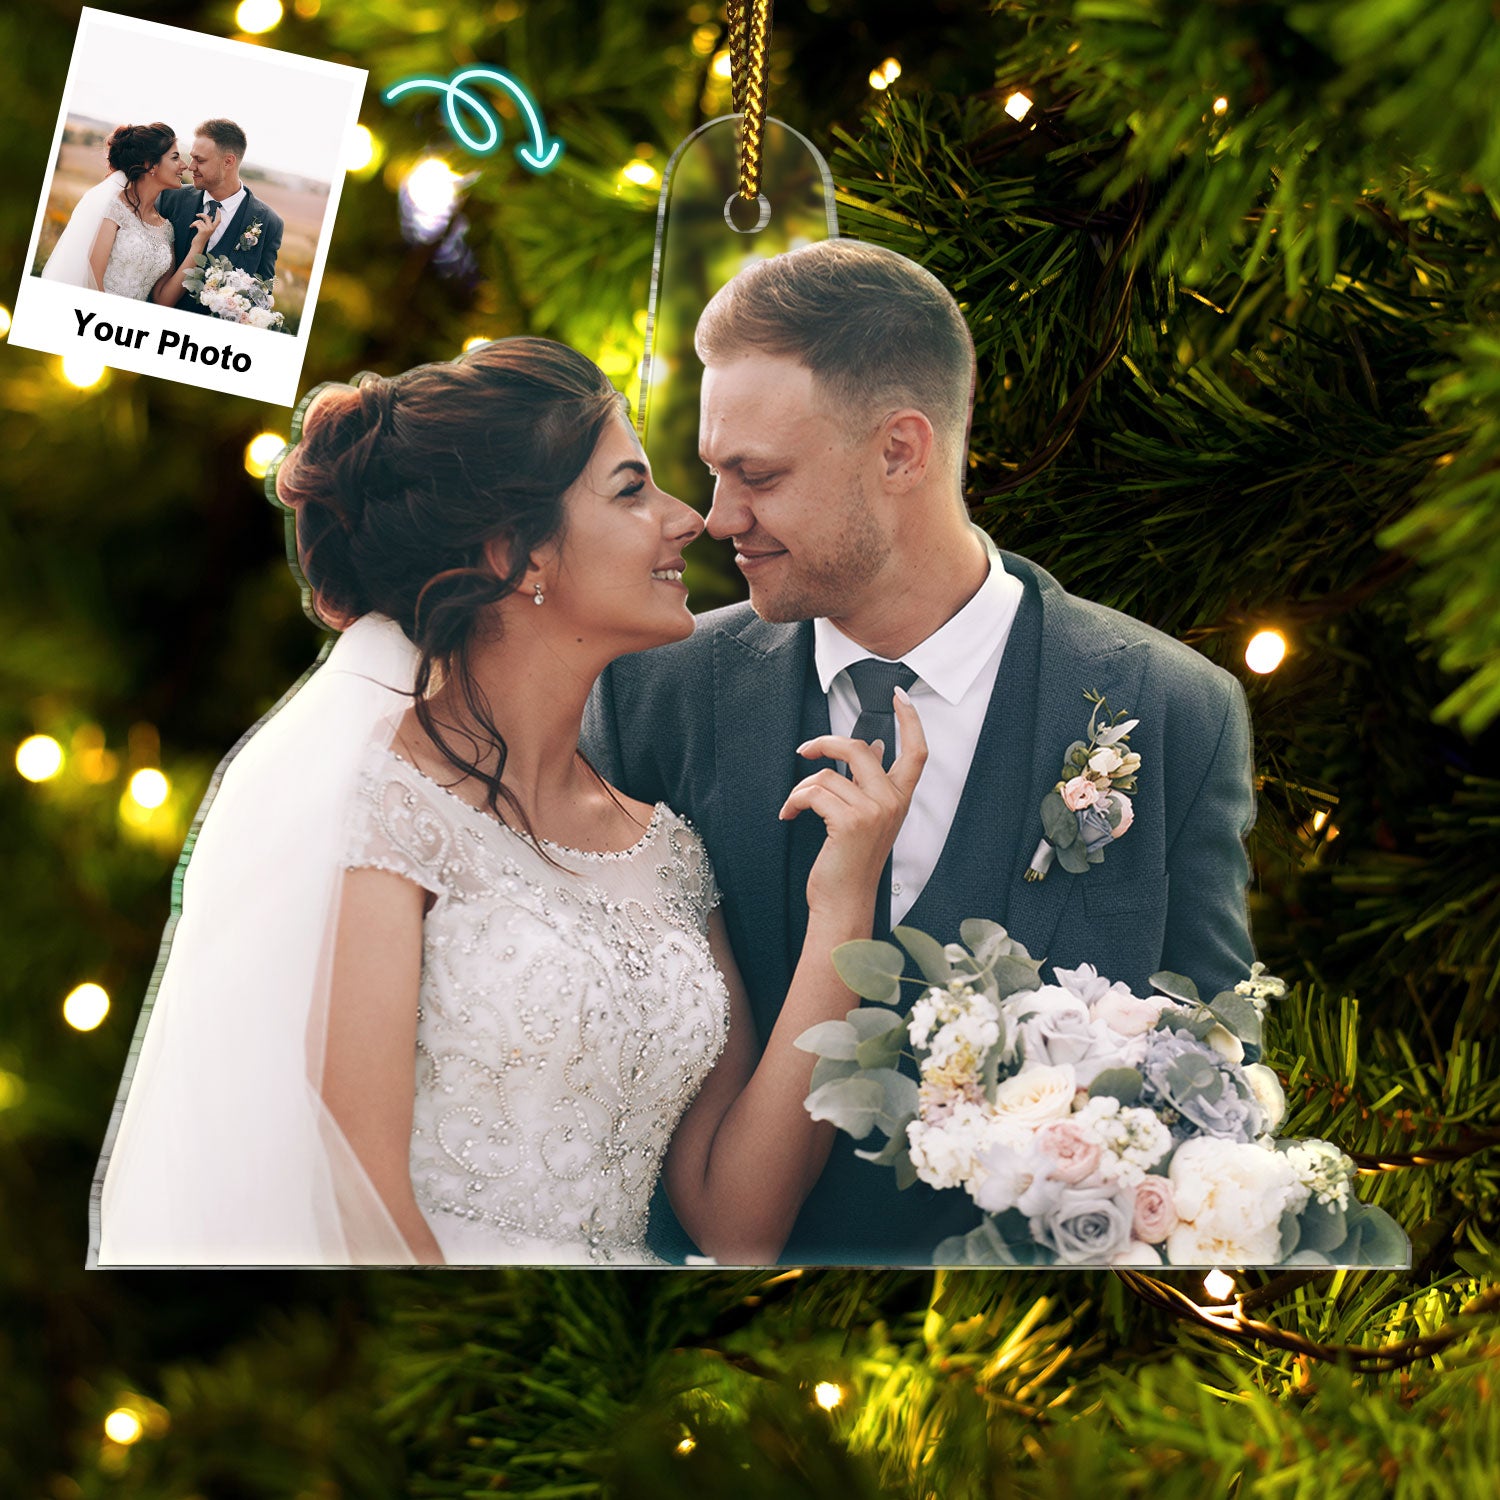 Custom Photo Our First Christmas Married - Gift For Couple, Bride, Groom, Engaged People - Personalized Acrylic Photo Ornament